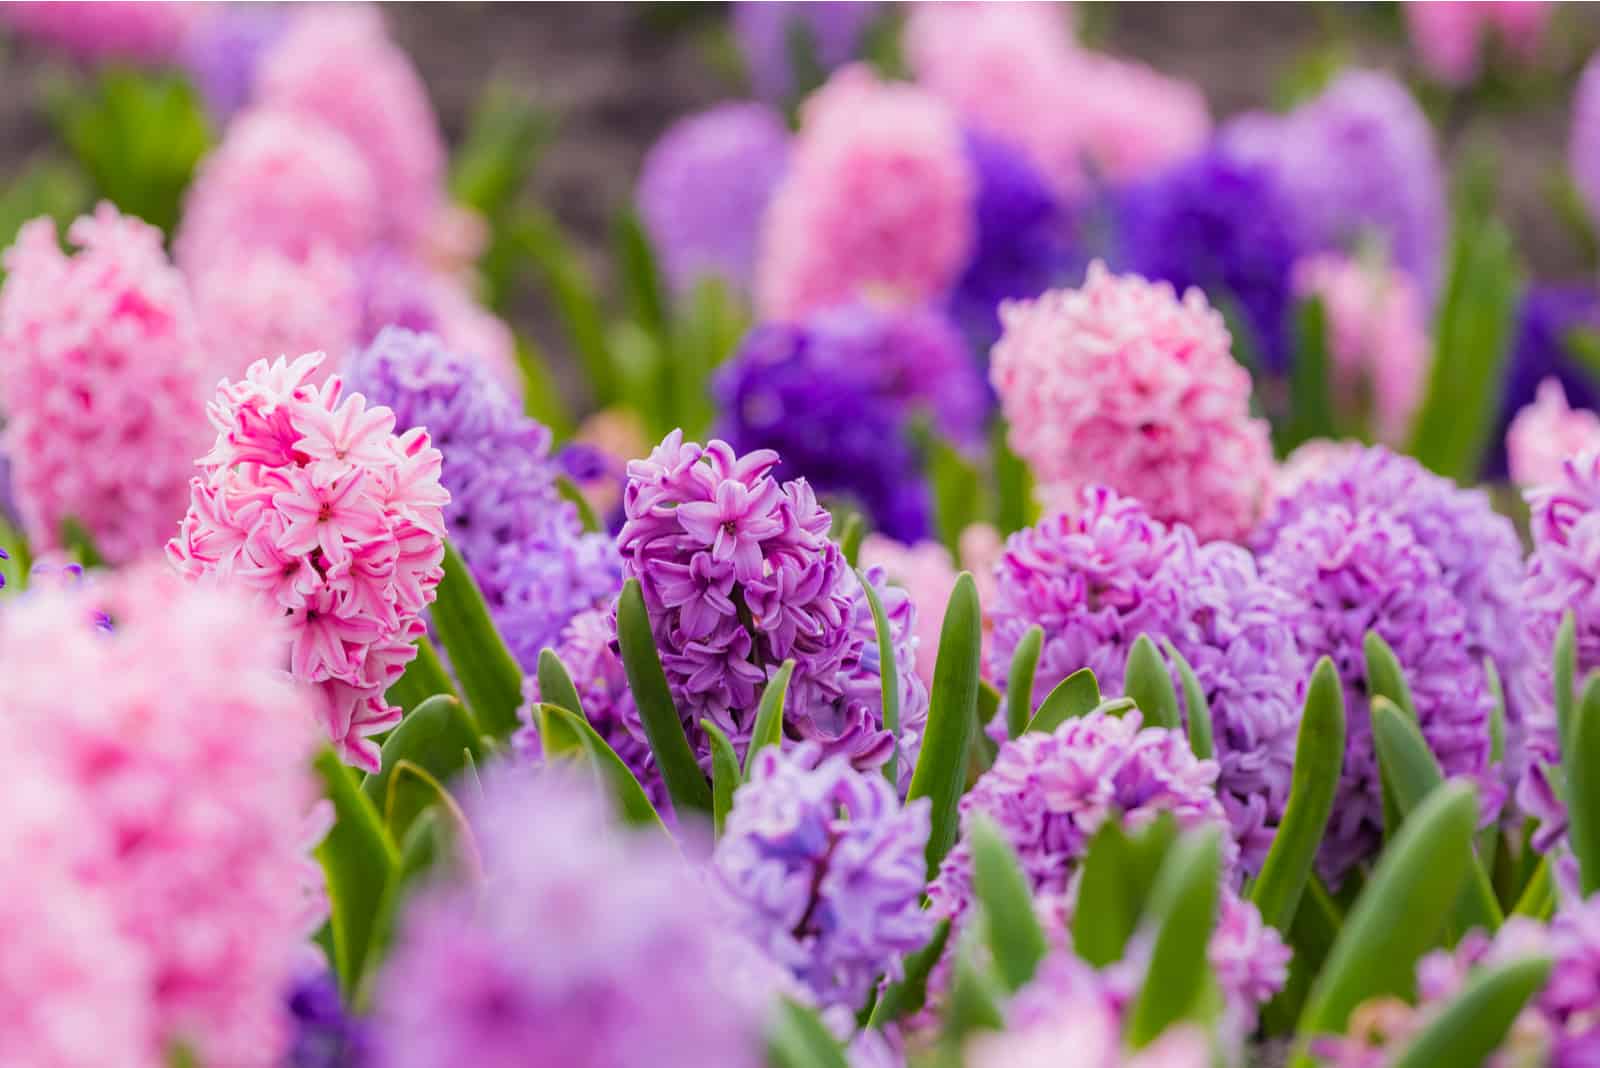 Large flower bed with multi-colored hyacinths